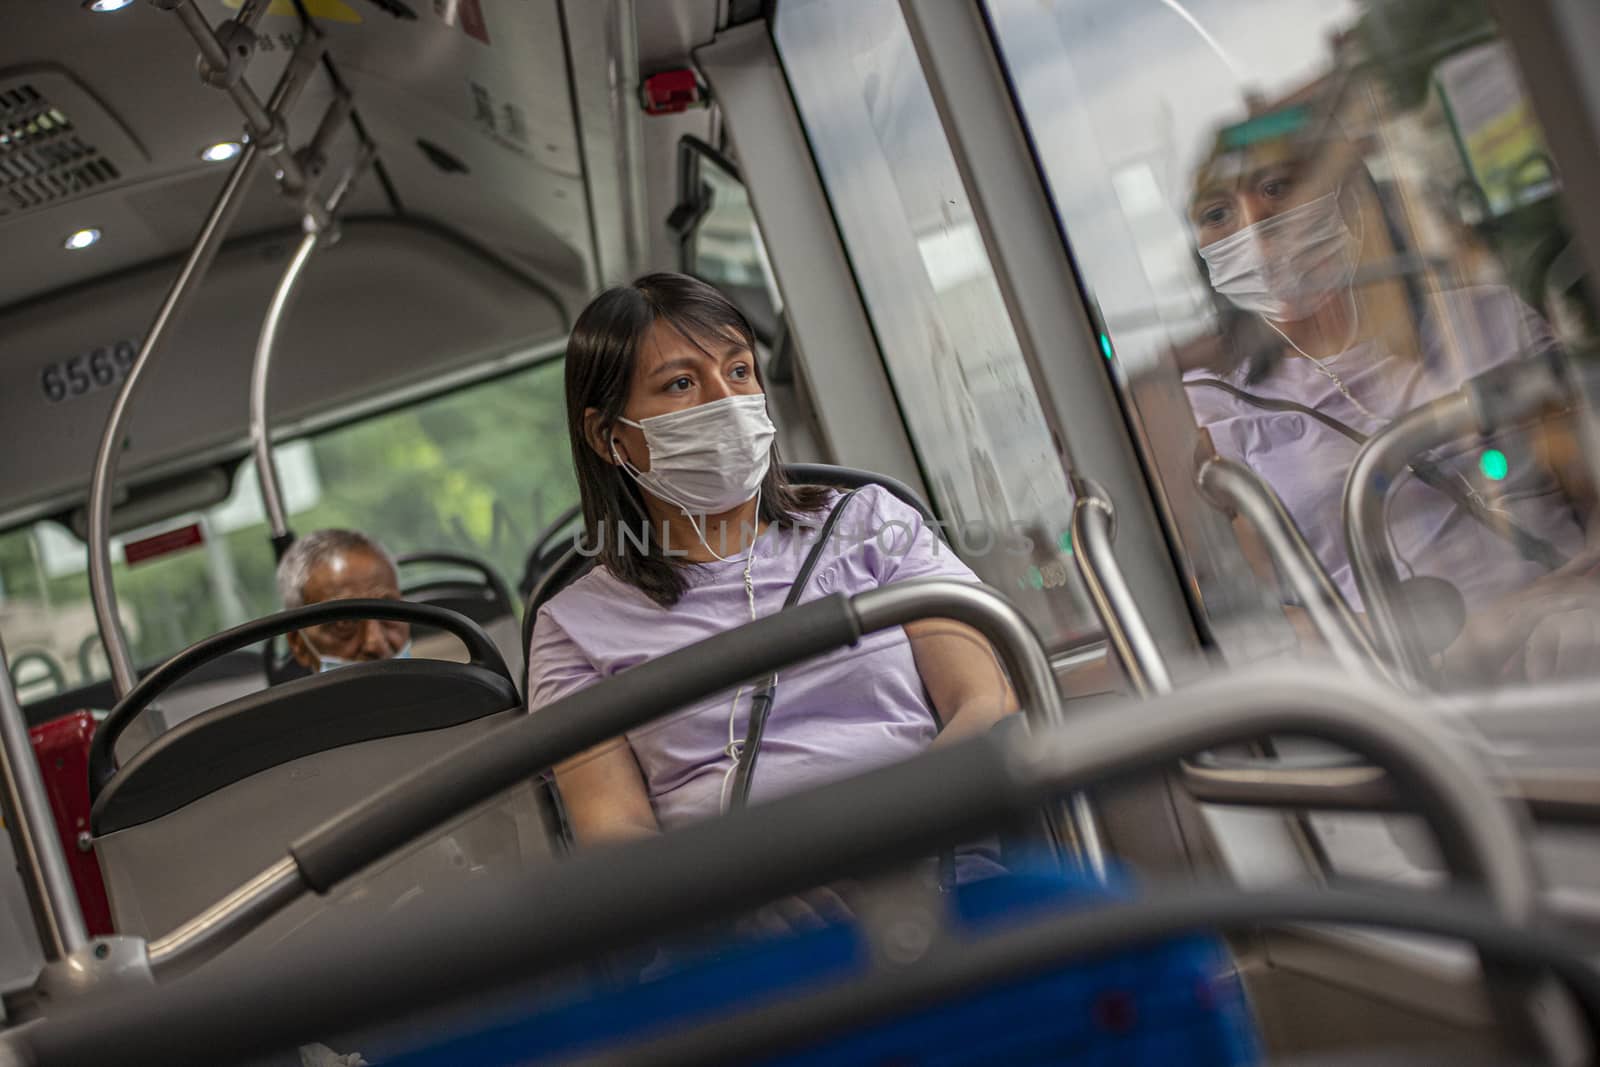 Girl in the bus with medical mask during Covid quarantine 3 by pippocarlot